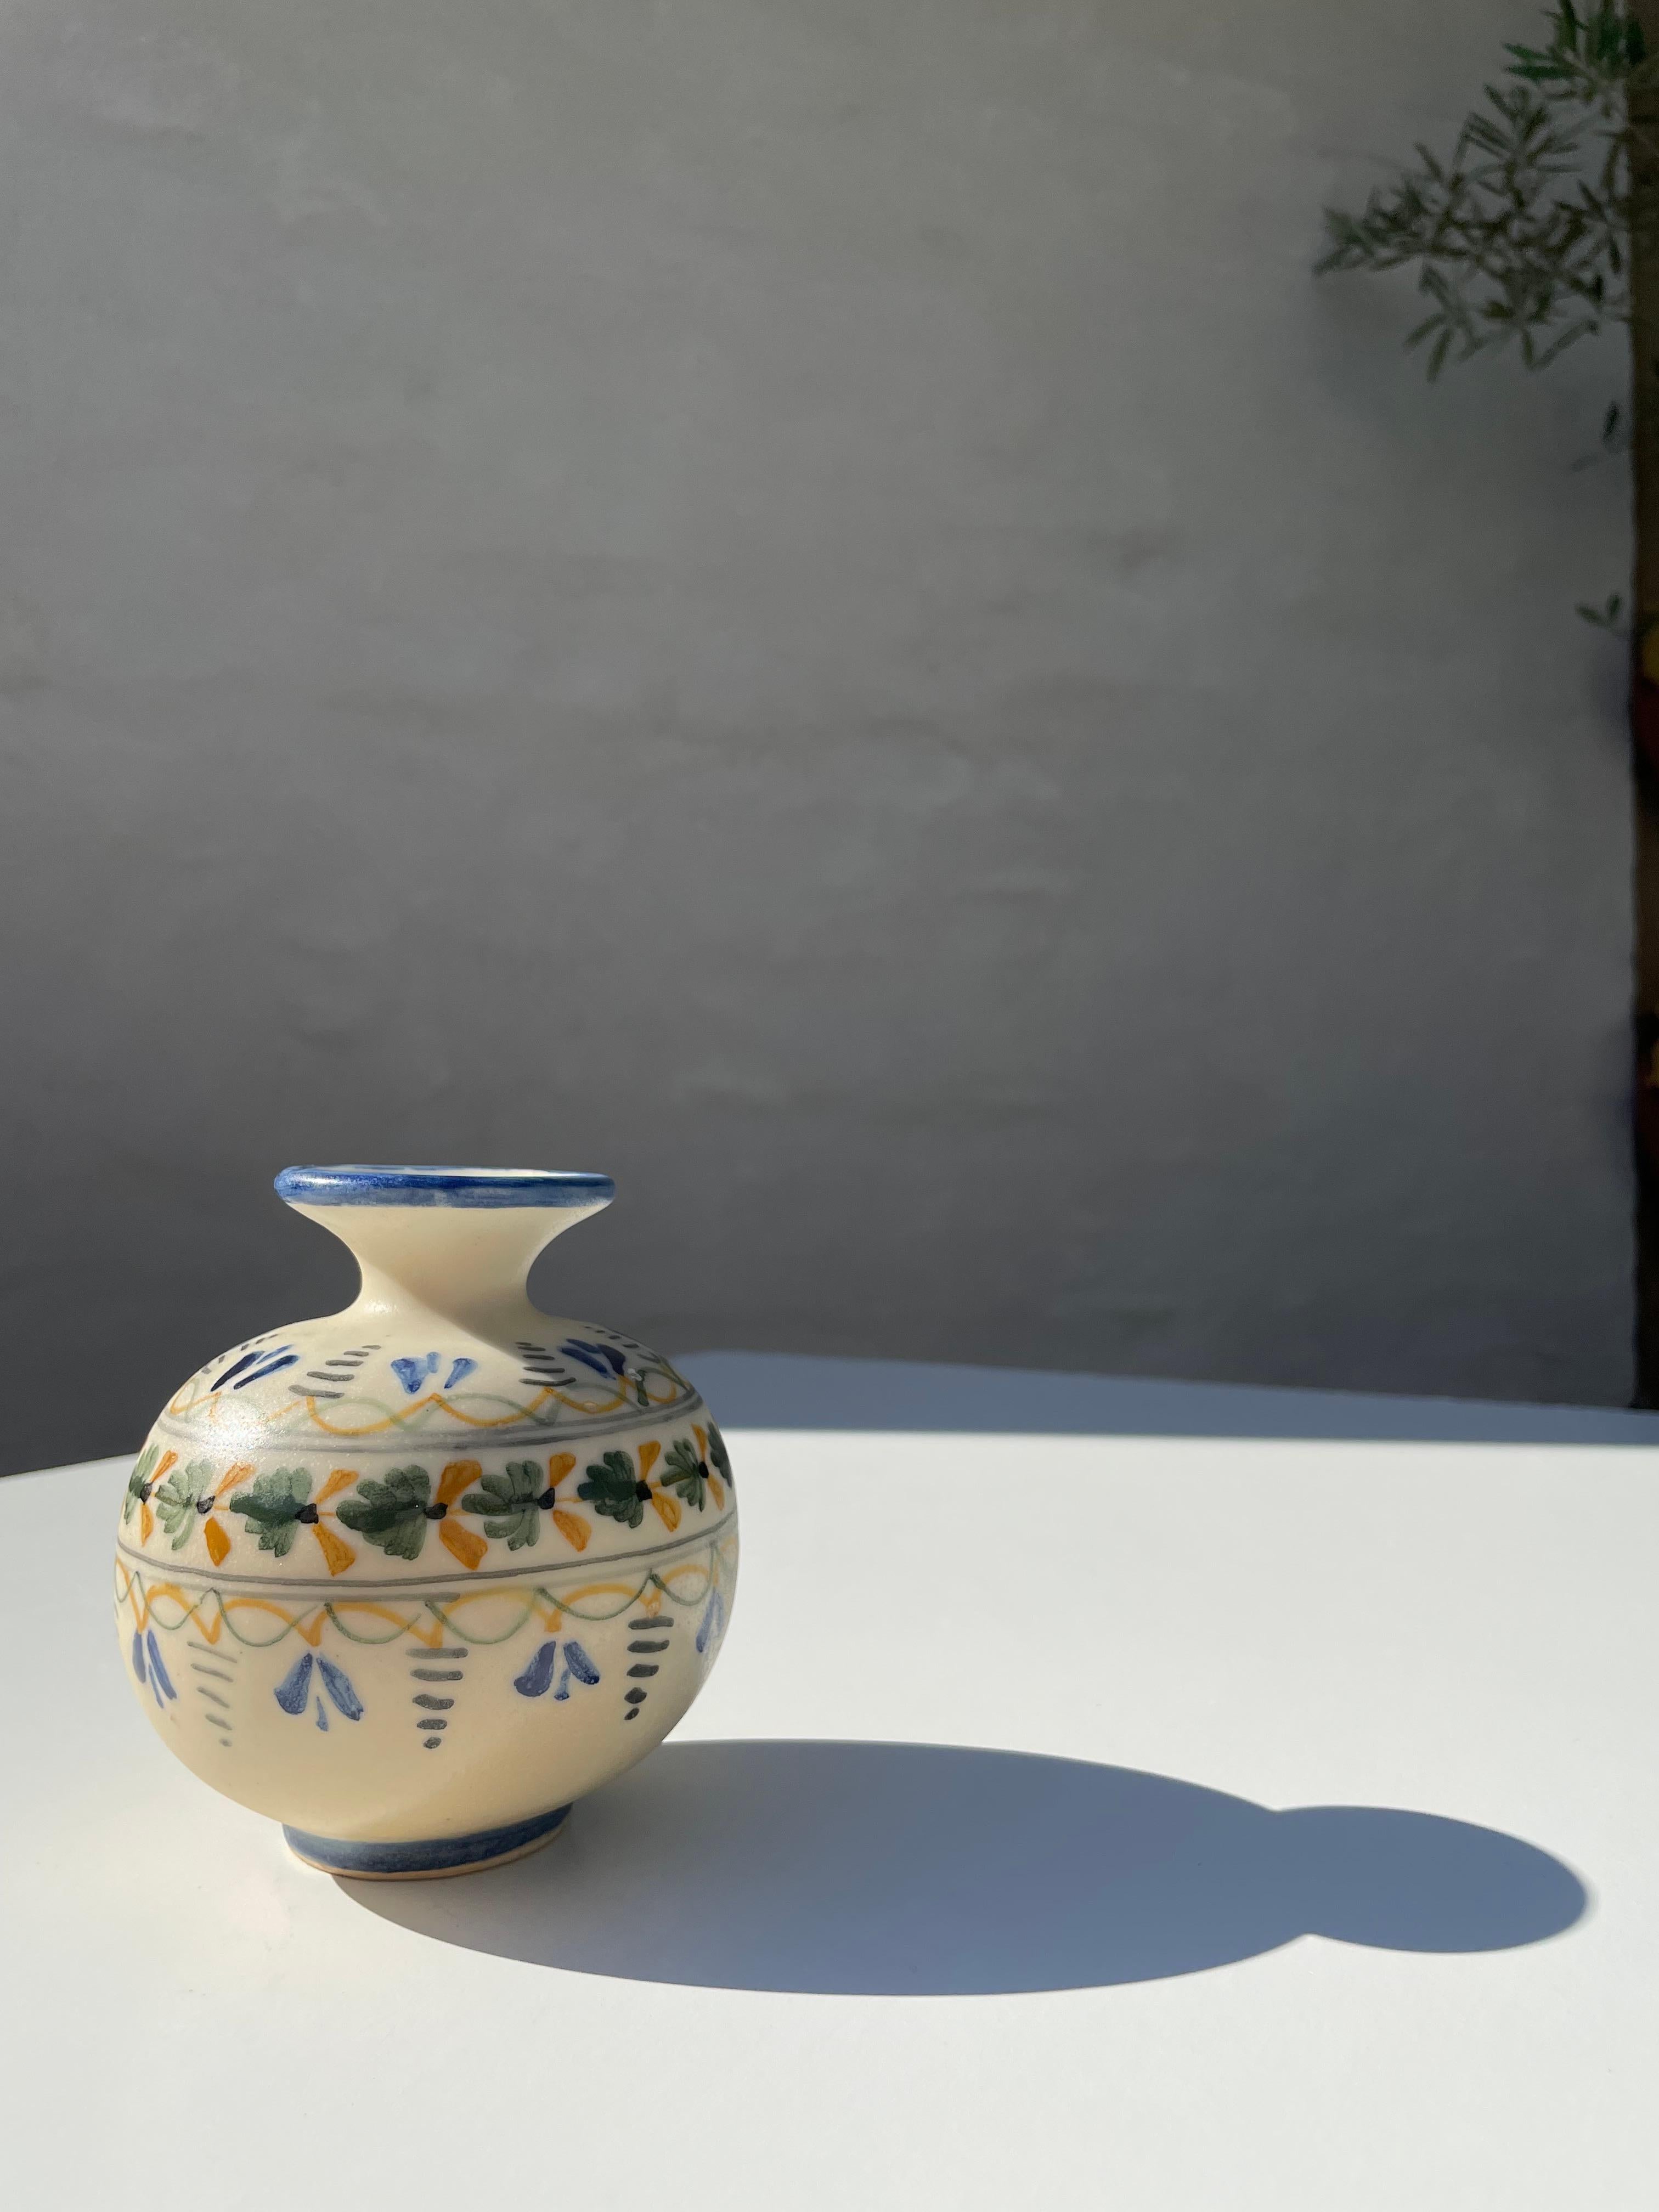 Handmade Mexican Talavera Mave ceramic vase delicately decorated by hand. Floral, organic decor in blue, green and dark yellow on a creamy light yellow colored base. Signed under base. Beautiful vintage condition. 
Mexico, early 20th century.